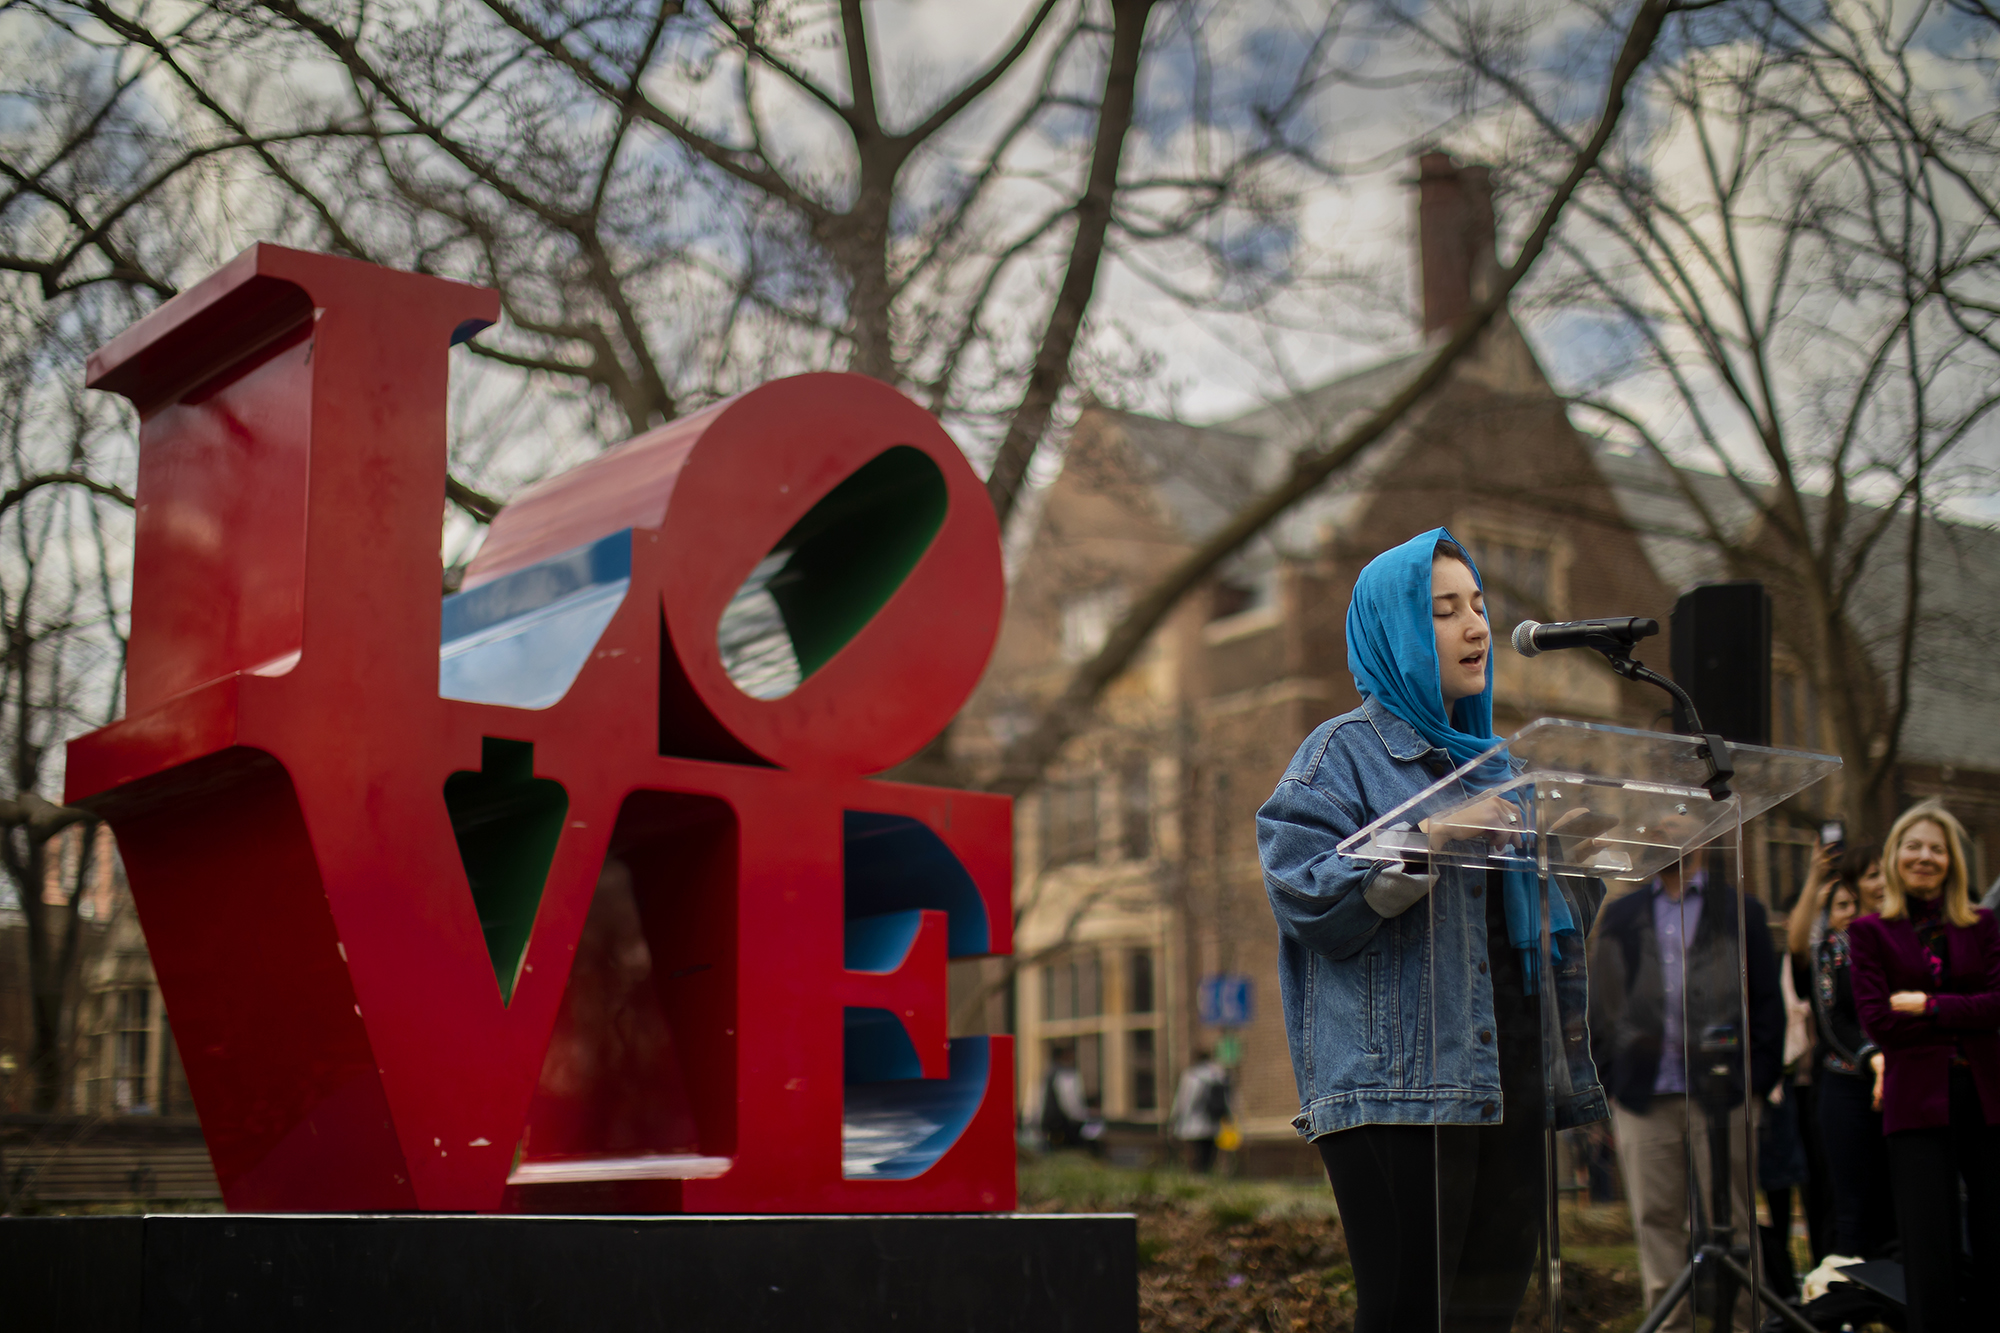 speaker at podium wearing head scarf addresses crowd while standing beside LOVE statue on campus